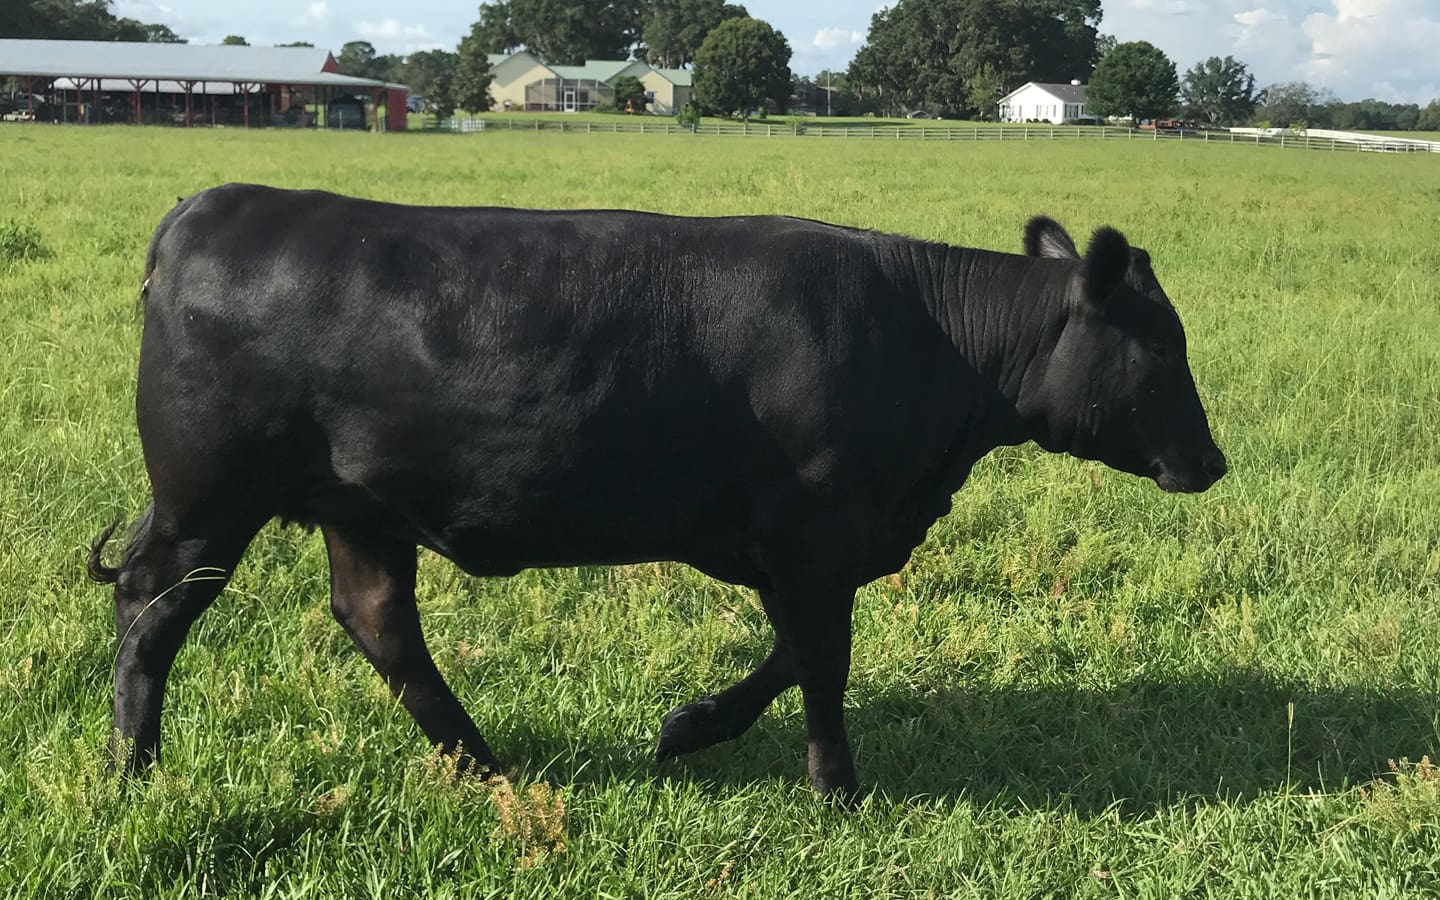 A black cow standing in the grass near trees.